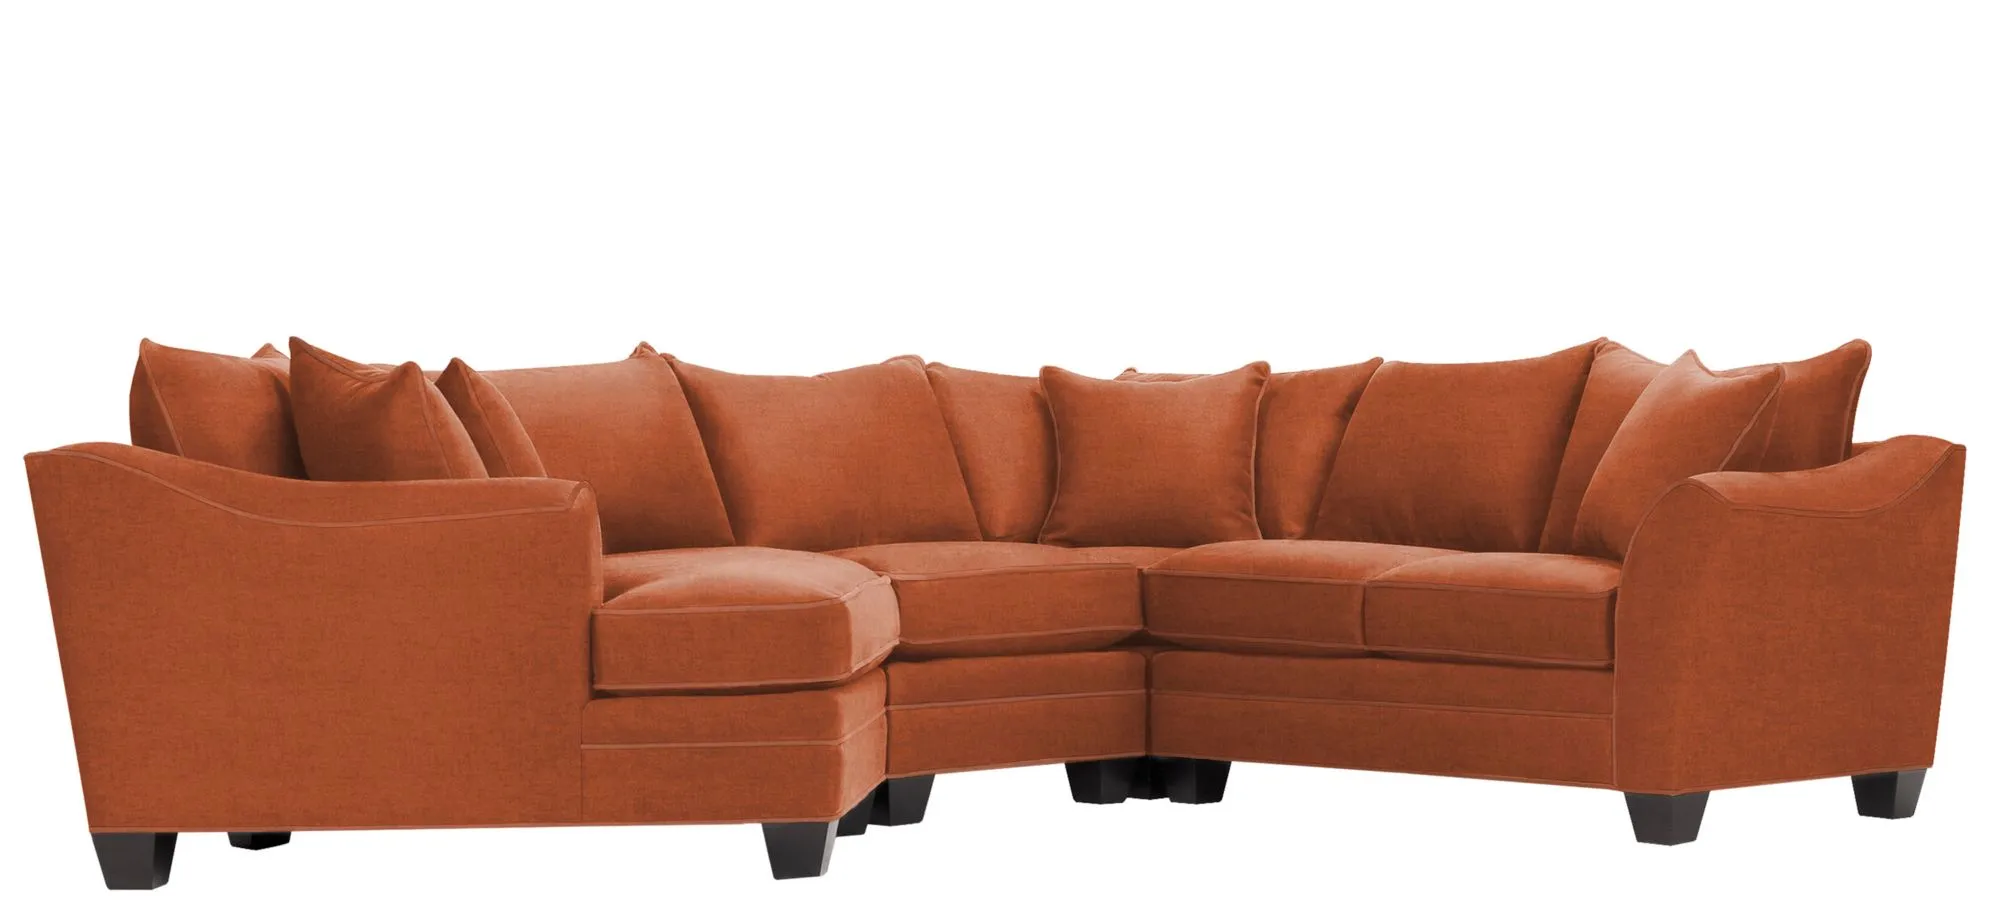 Foresthill 4-pc. Left Hand Cuddler Sectional Sofa in Santa Rosa Adobe by H.M. Richards